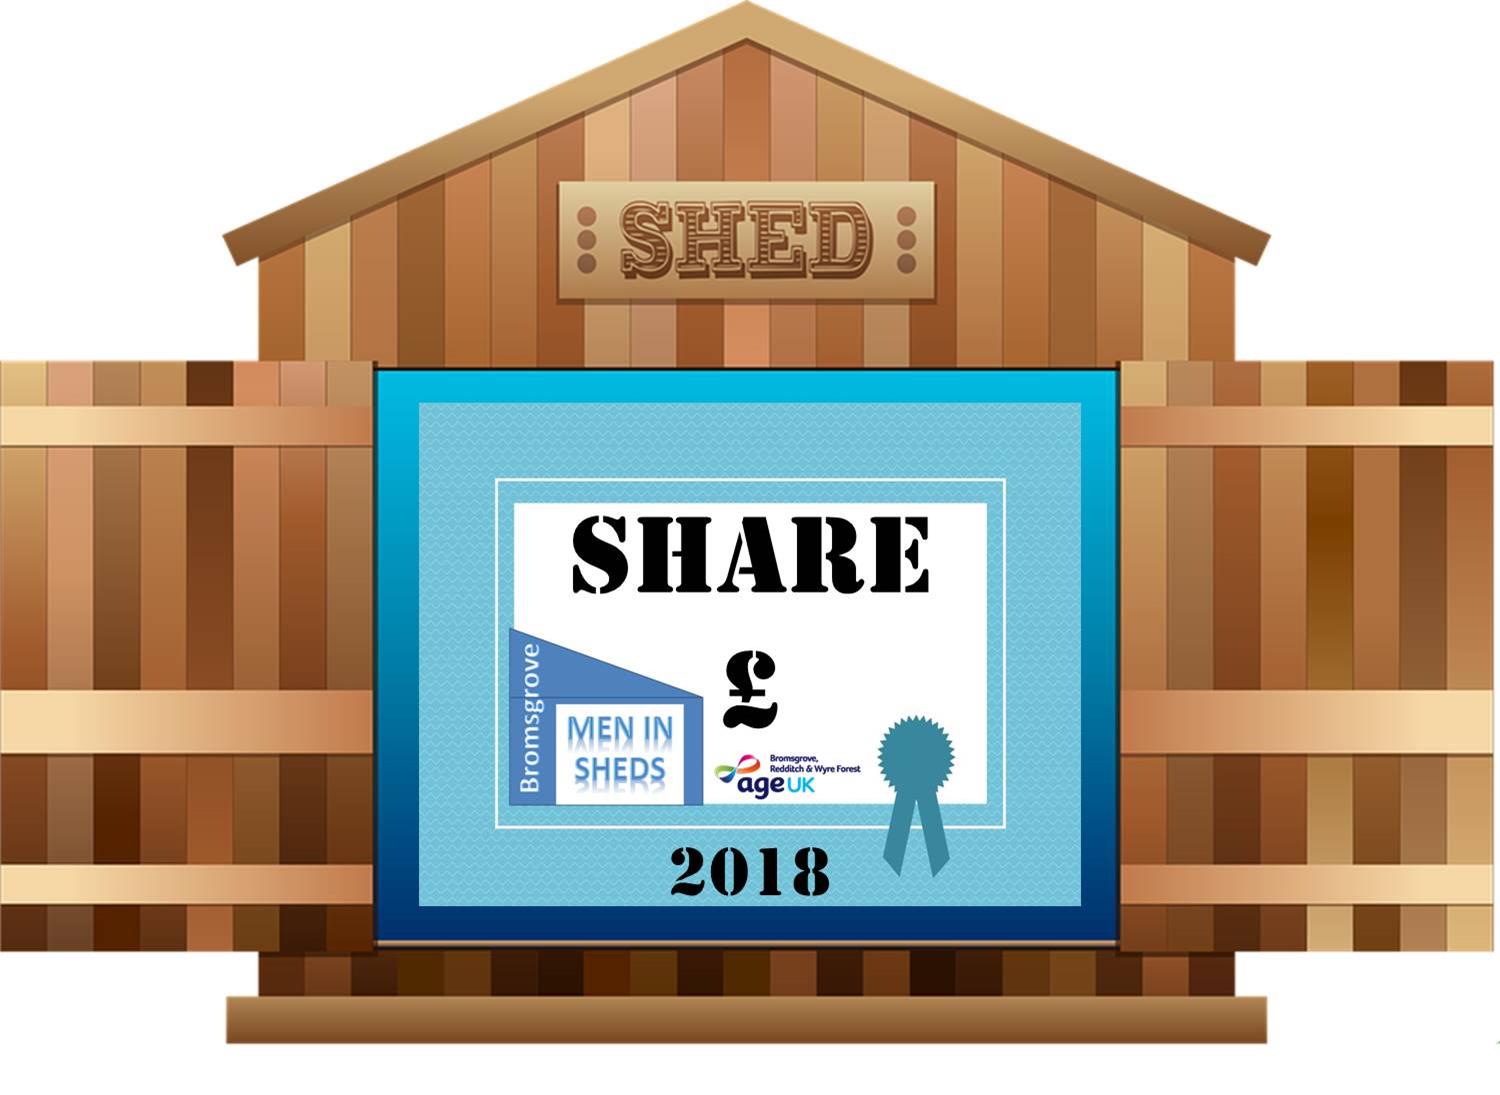 Support Your Local Shed